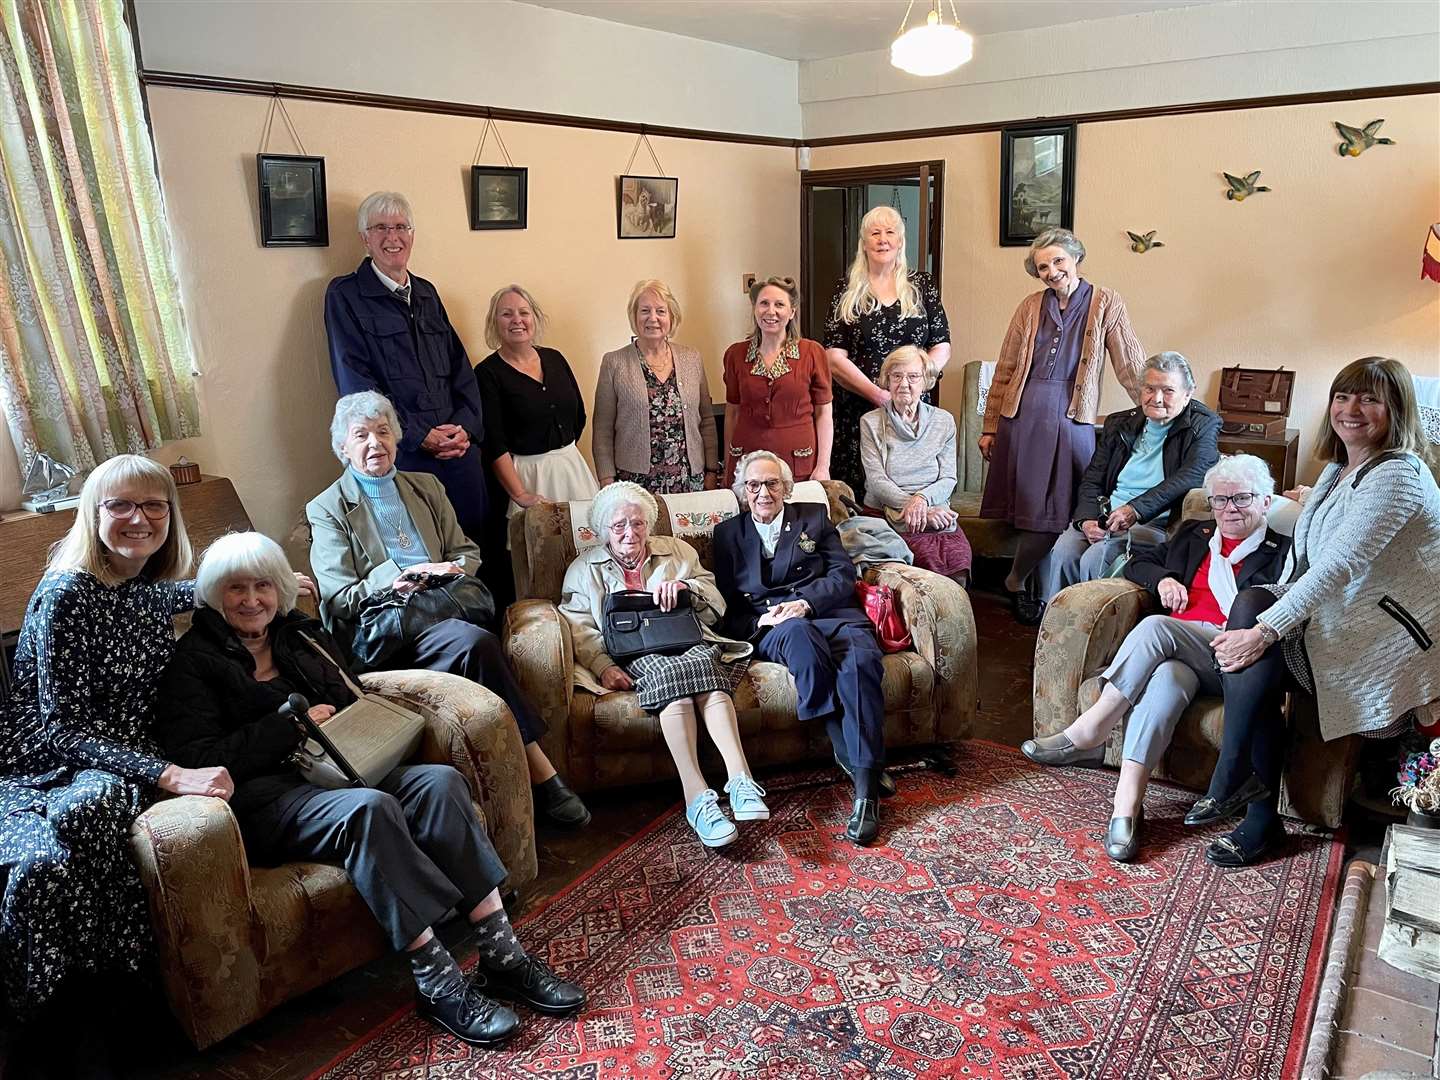 Iris and May seated together on the sofa surrounded by Inspired Friendships members and volunteers of the Old Forge Wartime House